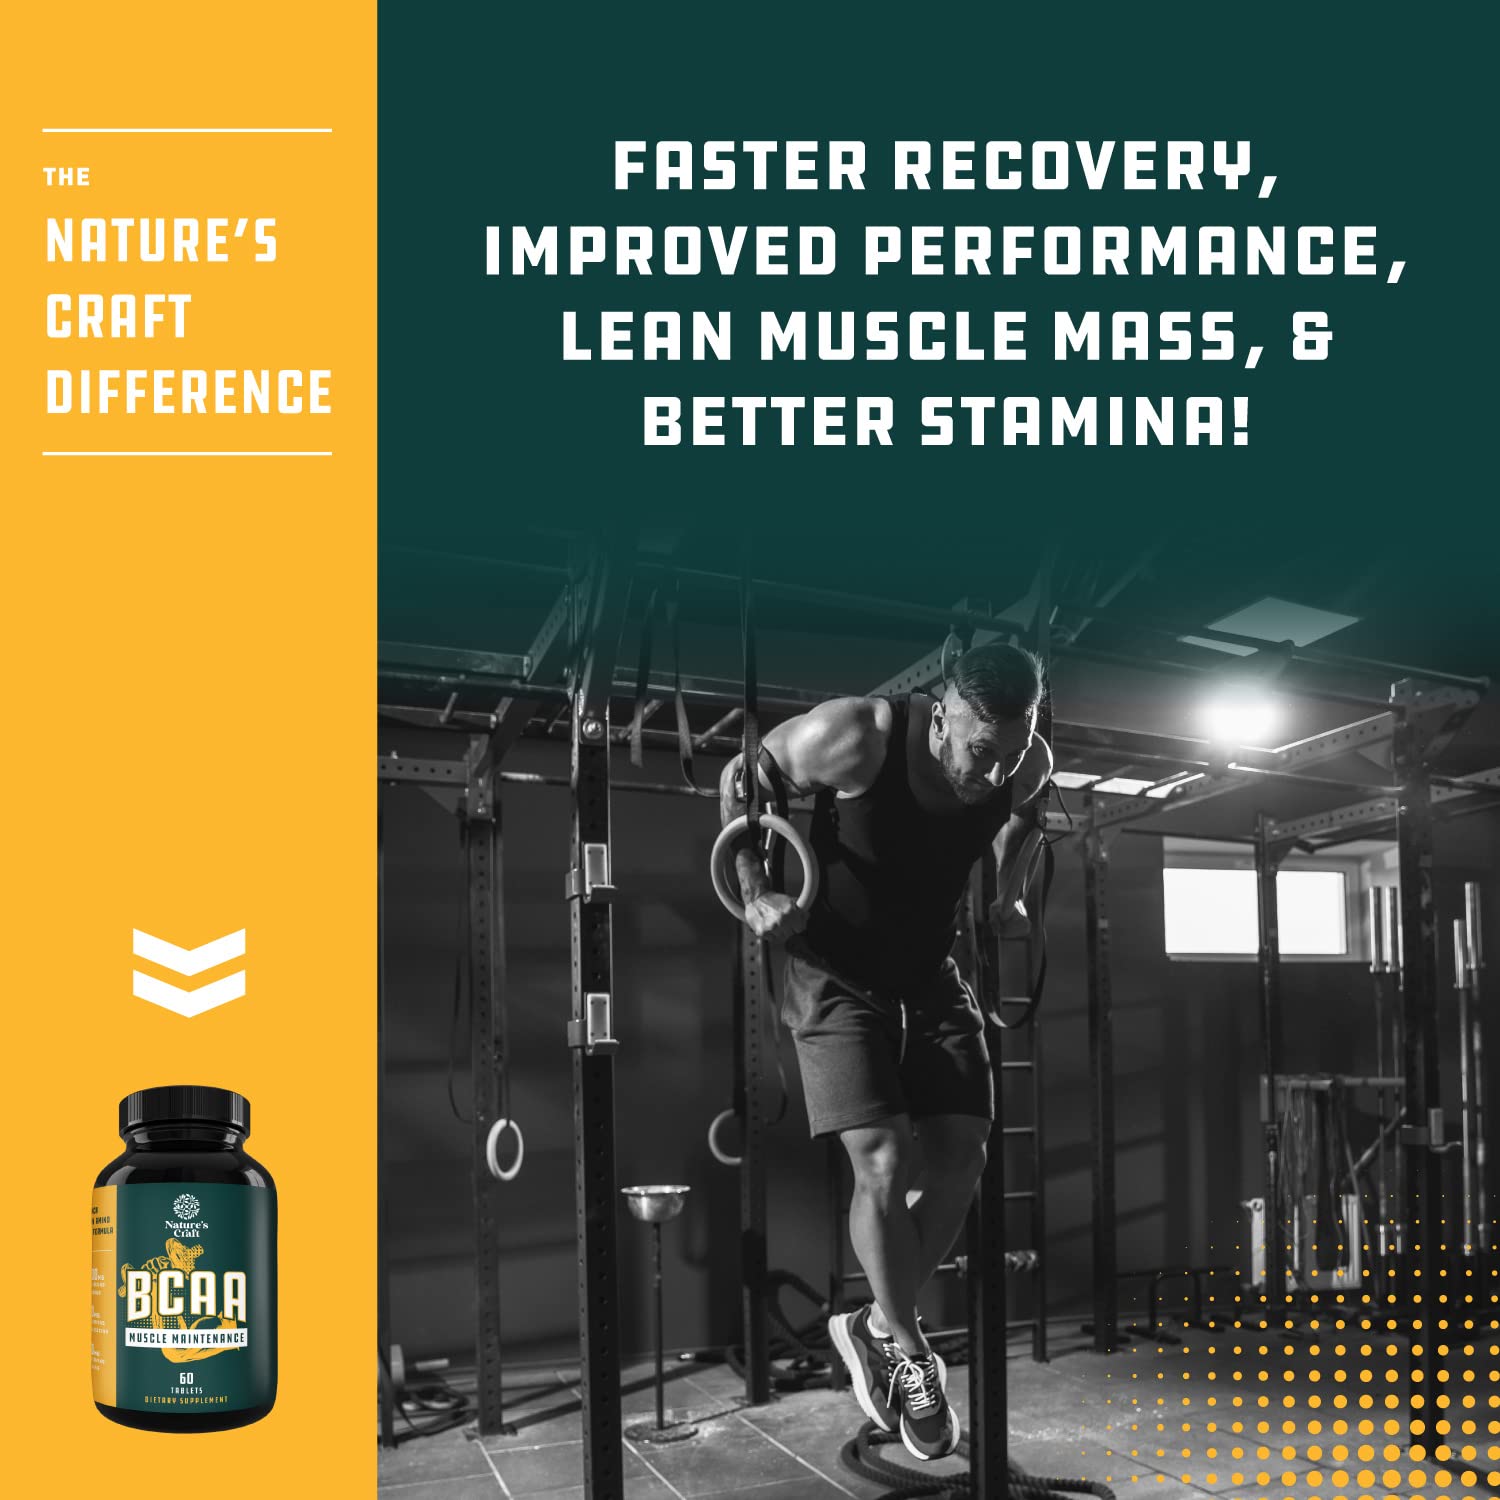 Bundle of Extra Strength Test Booster for Men and Branch Chain Amino Acids Supplement - - Natural Energy Supplement for Men with Horny Goat Weed - Post Workout Muscle Recovery and Growth Support